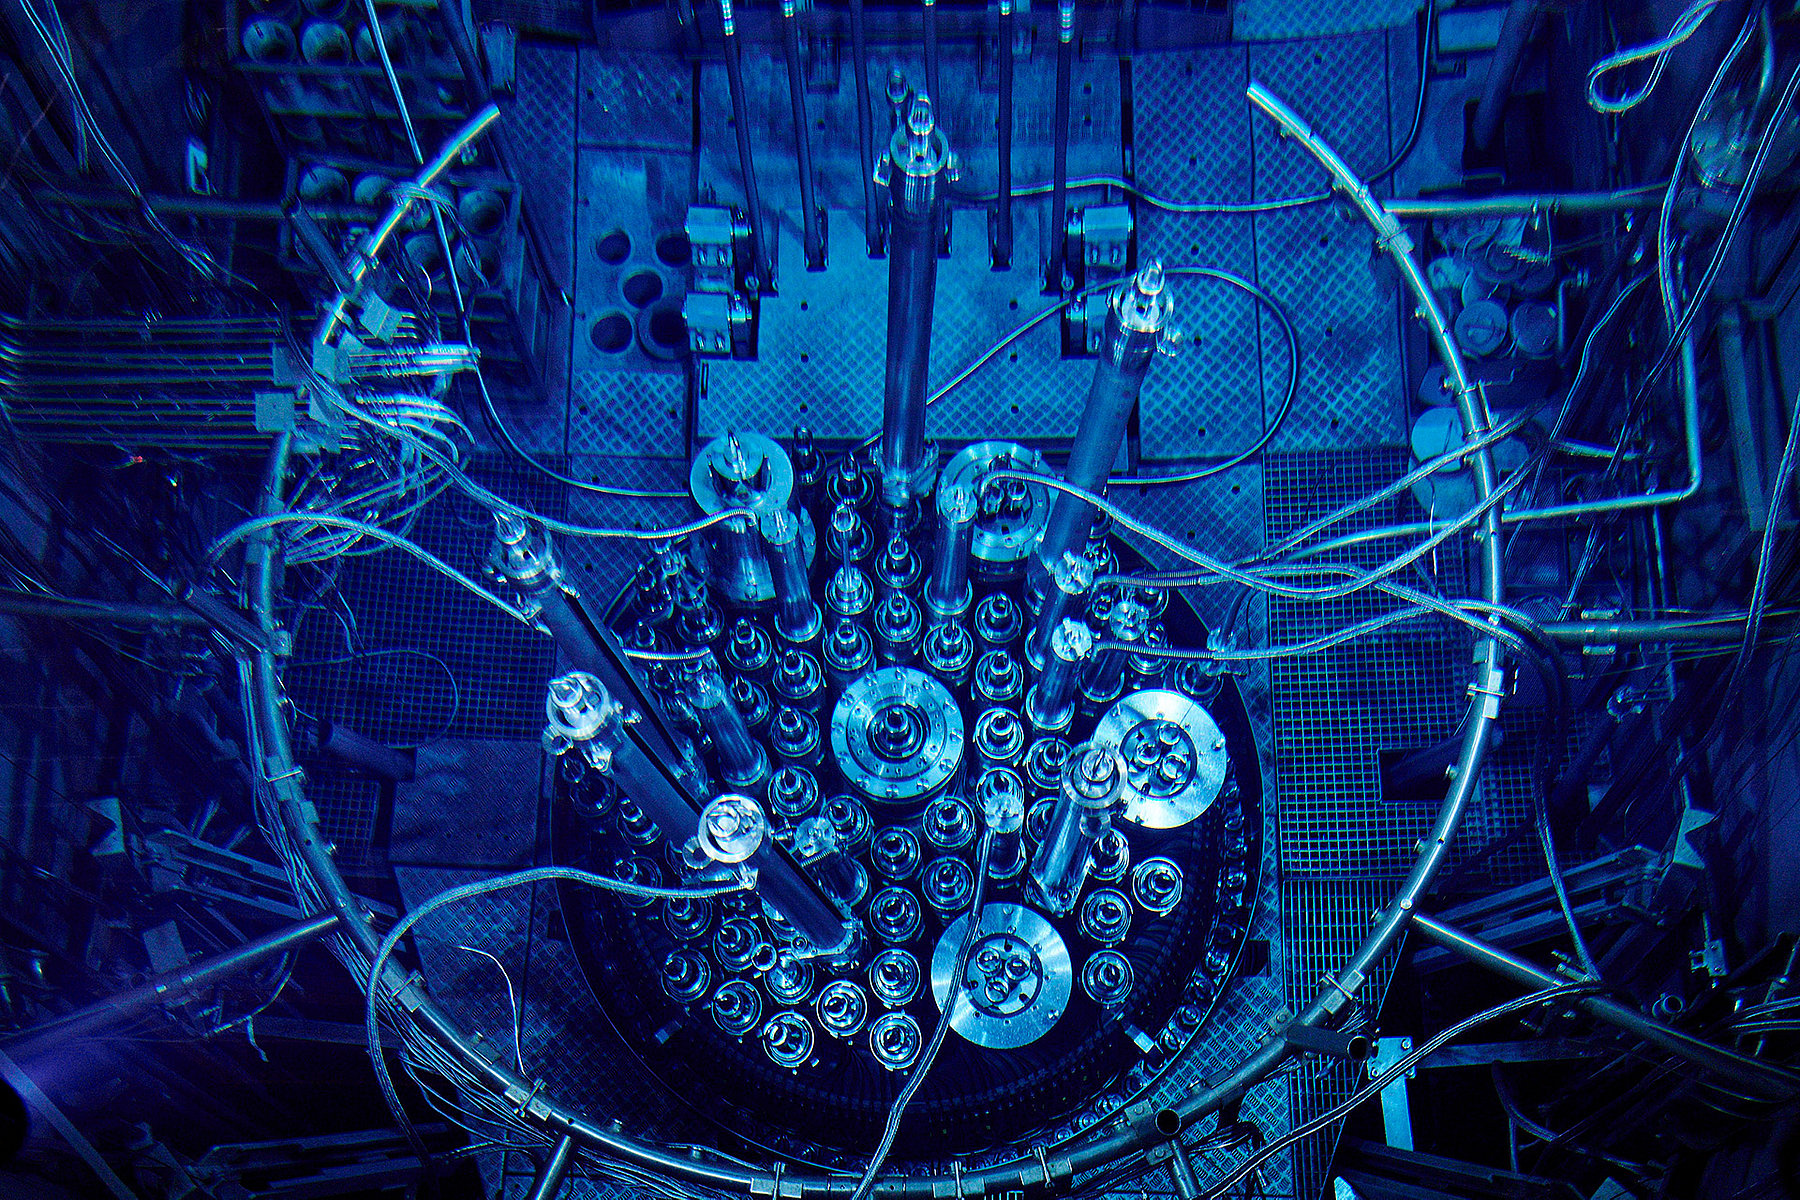 BR2 research reactor